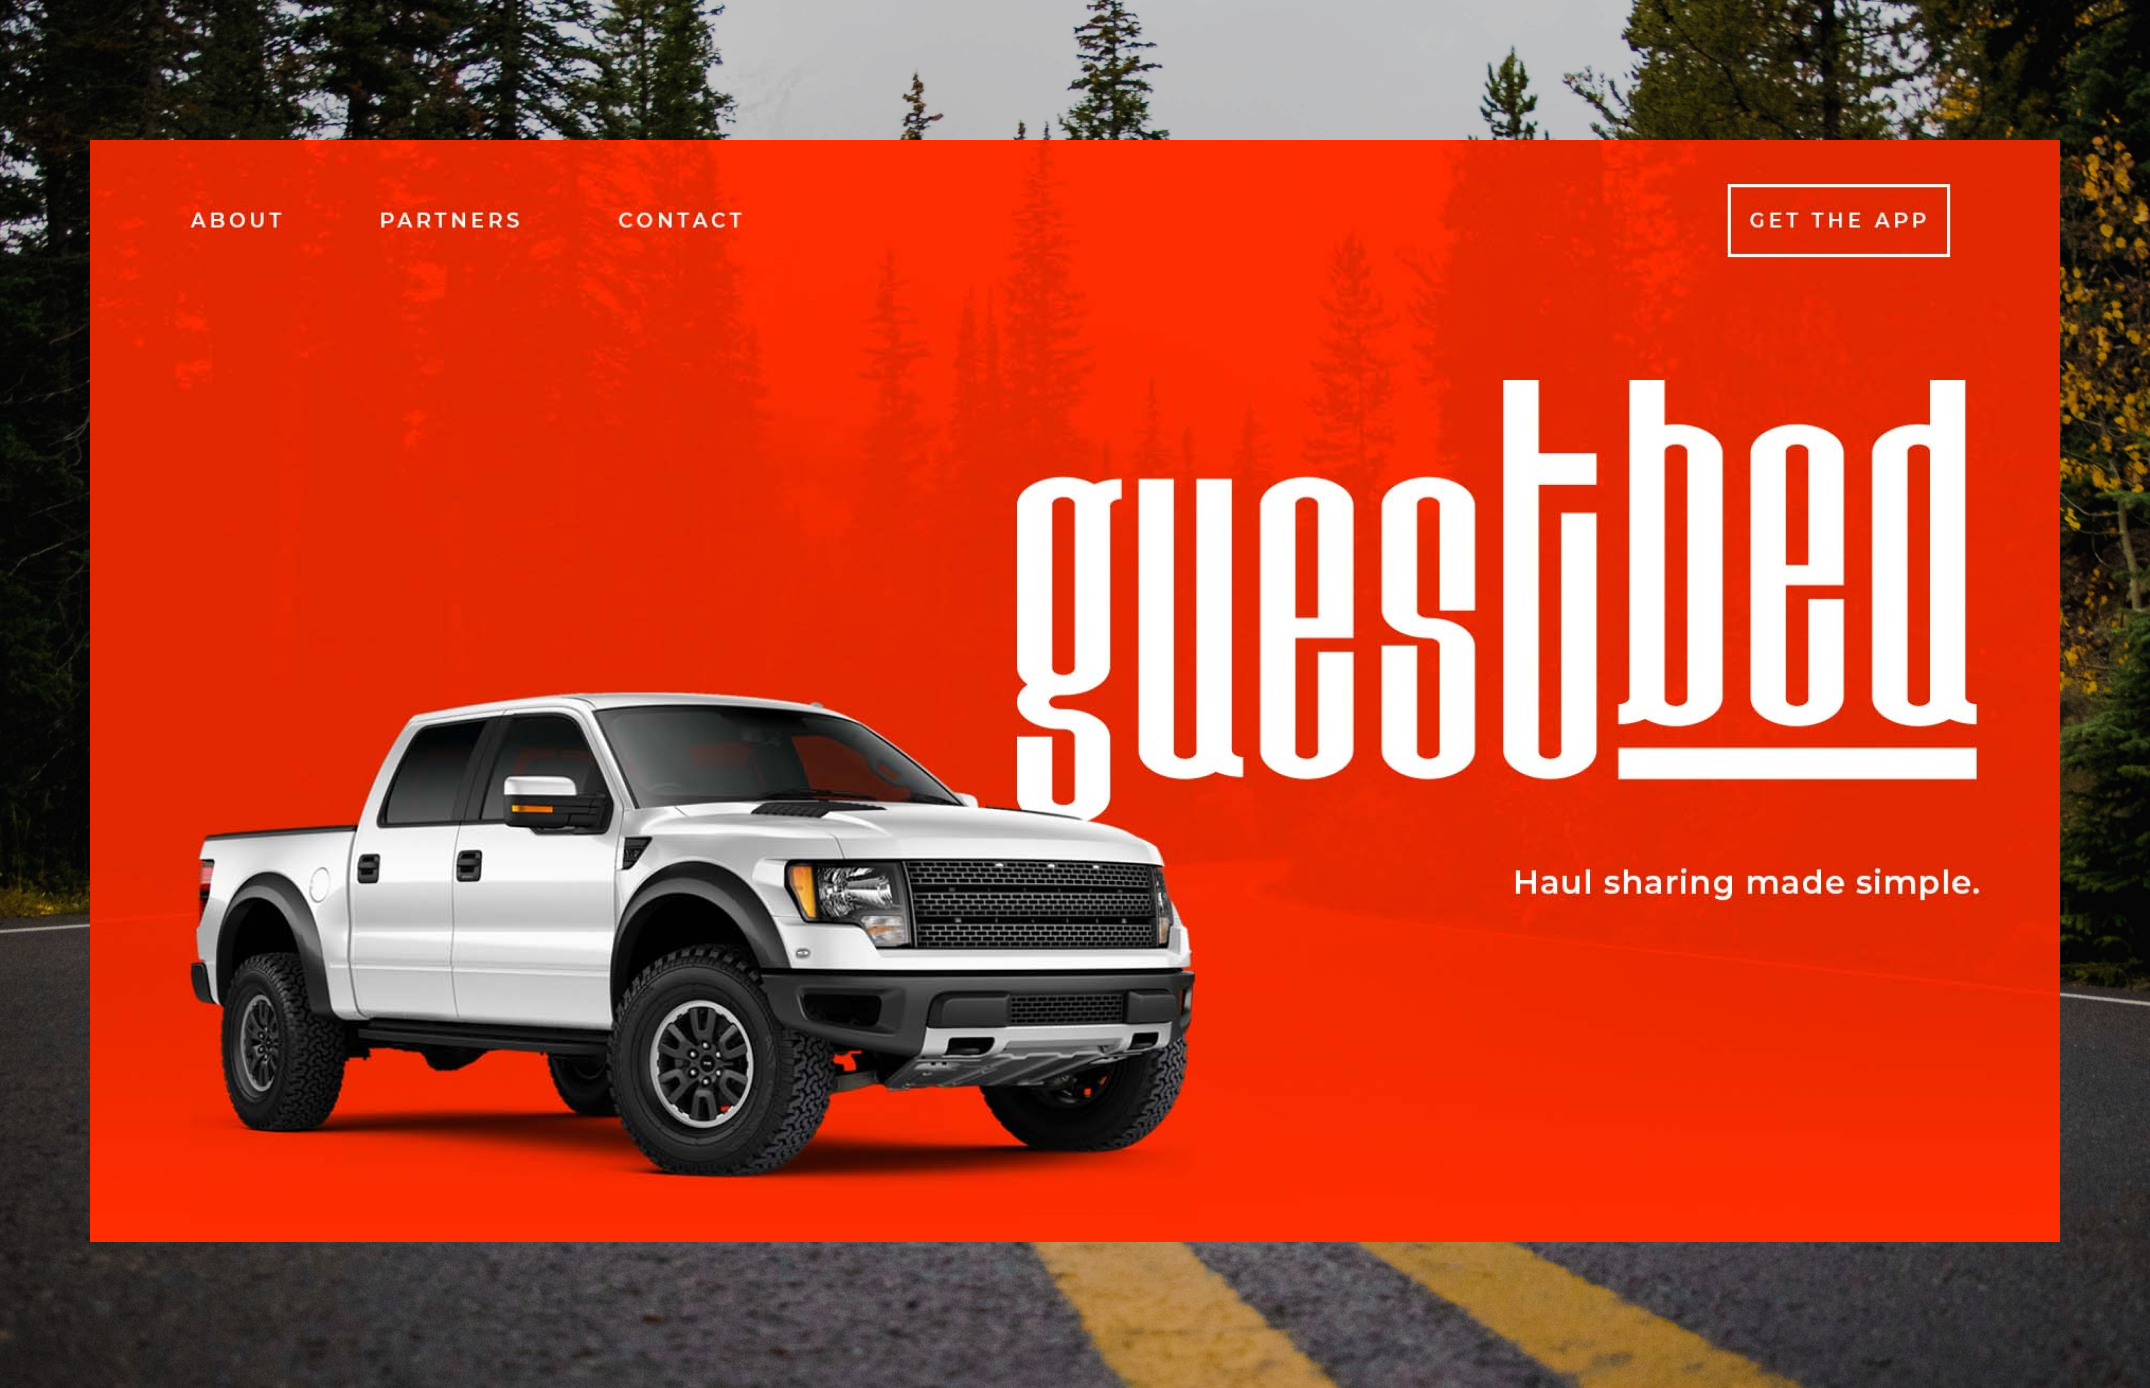 Screengrab of guestbed website showing a truck and their brand name